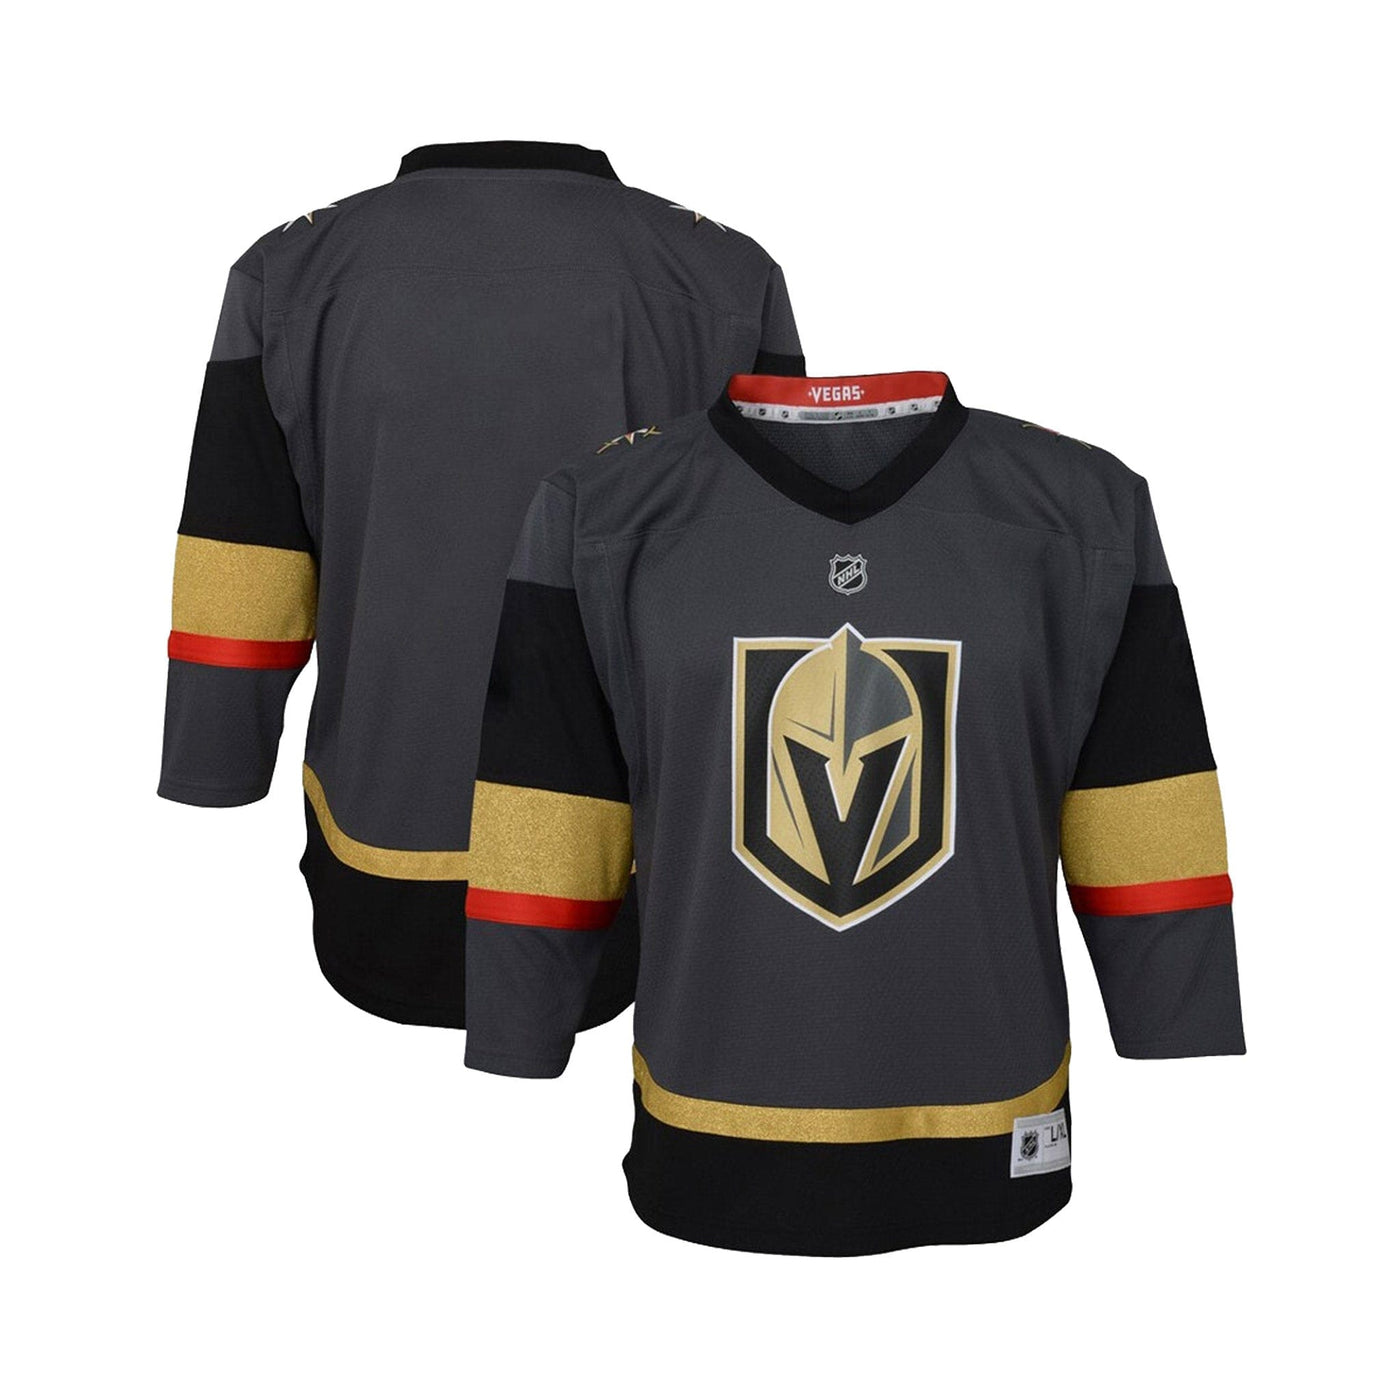 Vegas Golden Knights Home Outer Stuff Replica Youth Jersey - The Hockey Shop Source For Sports